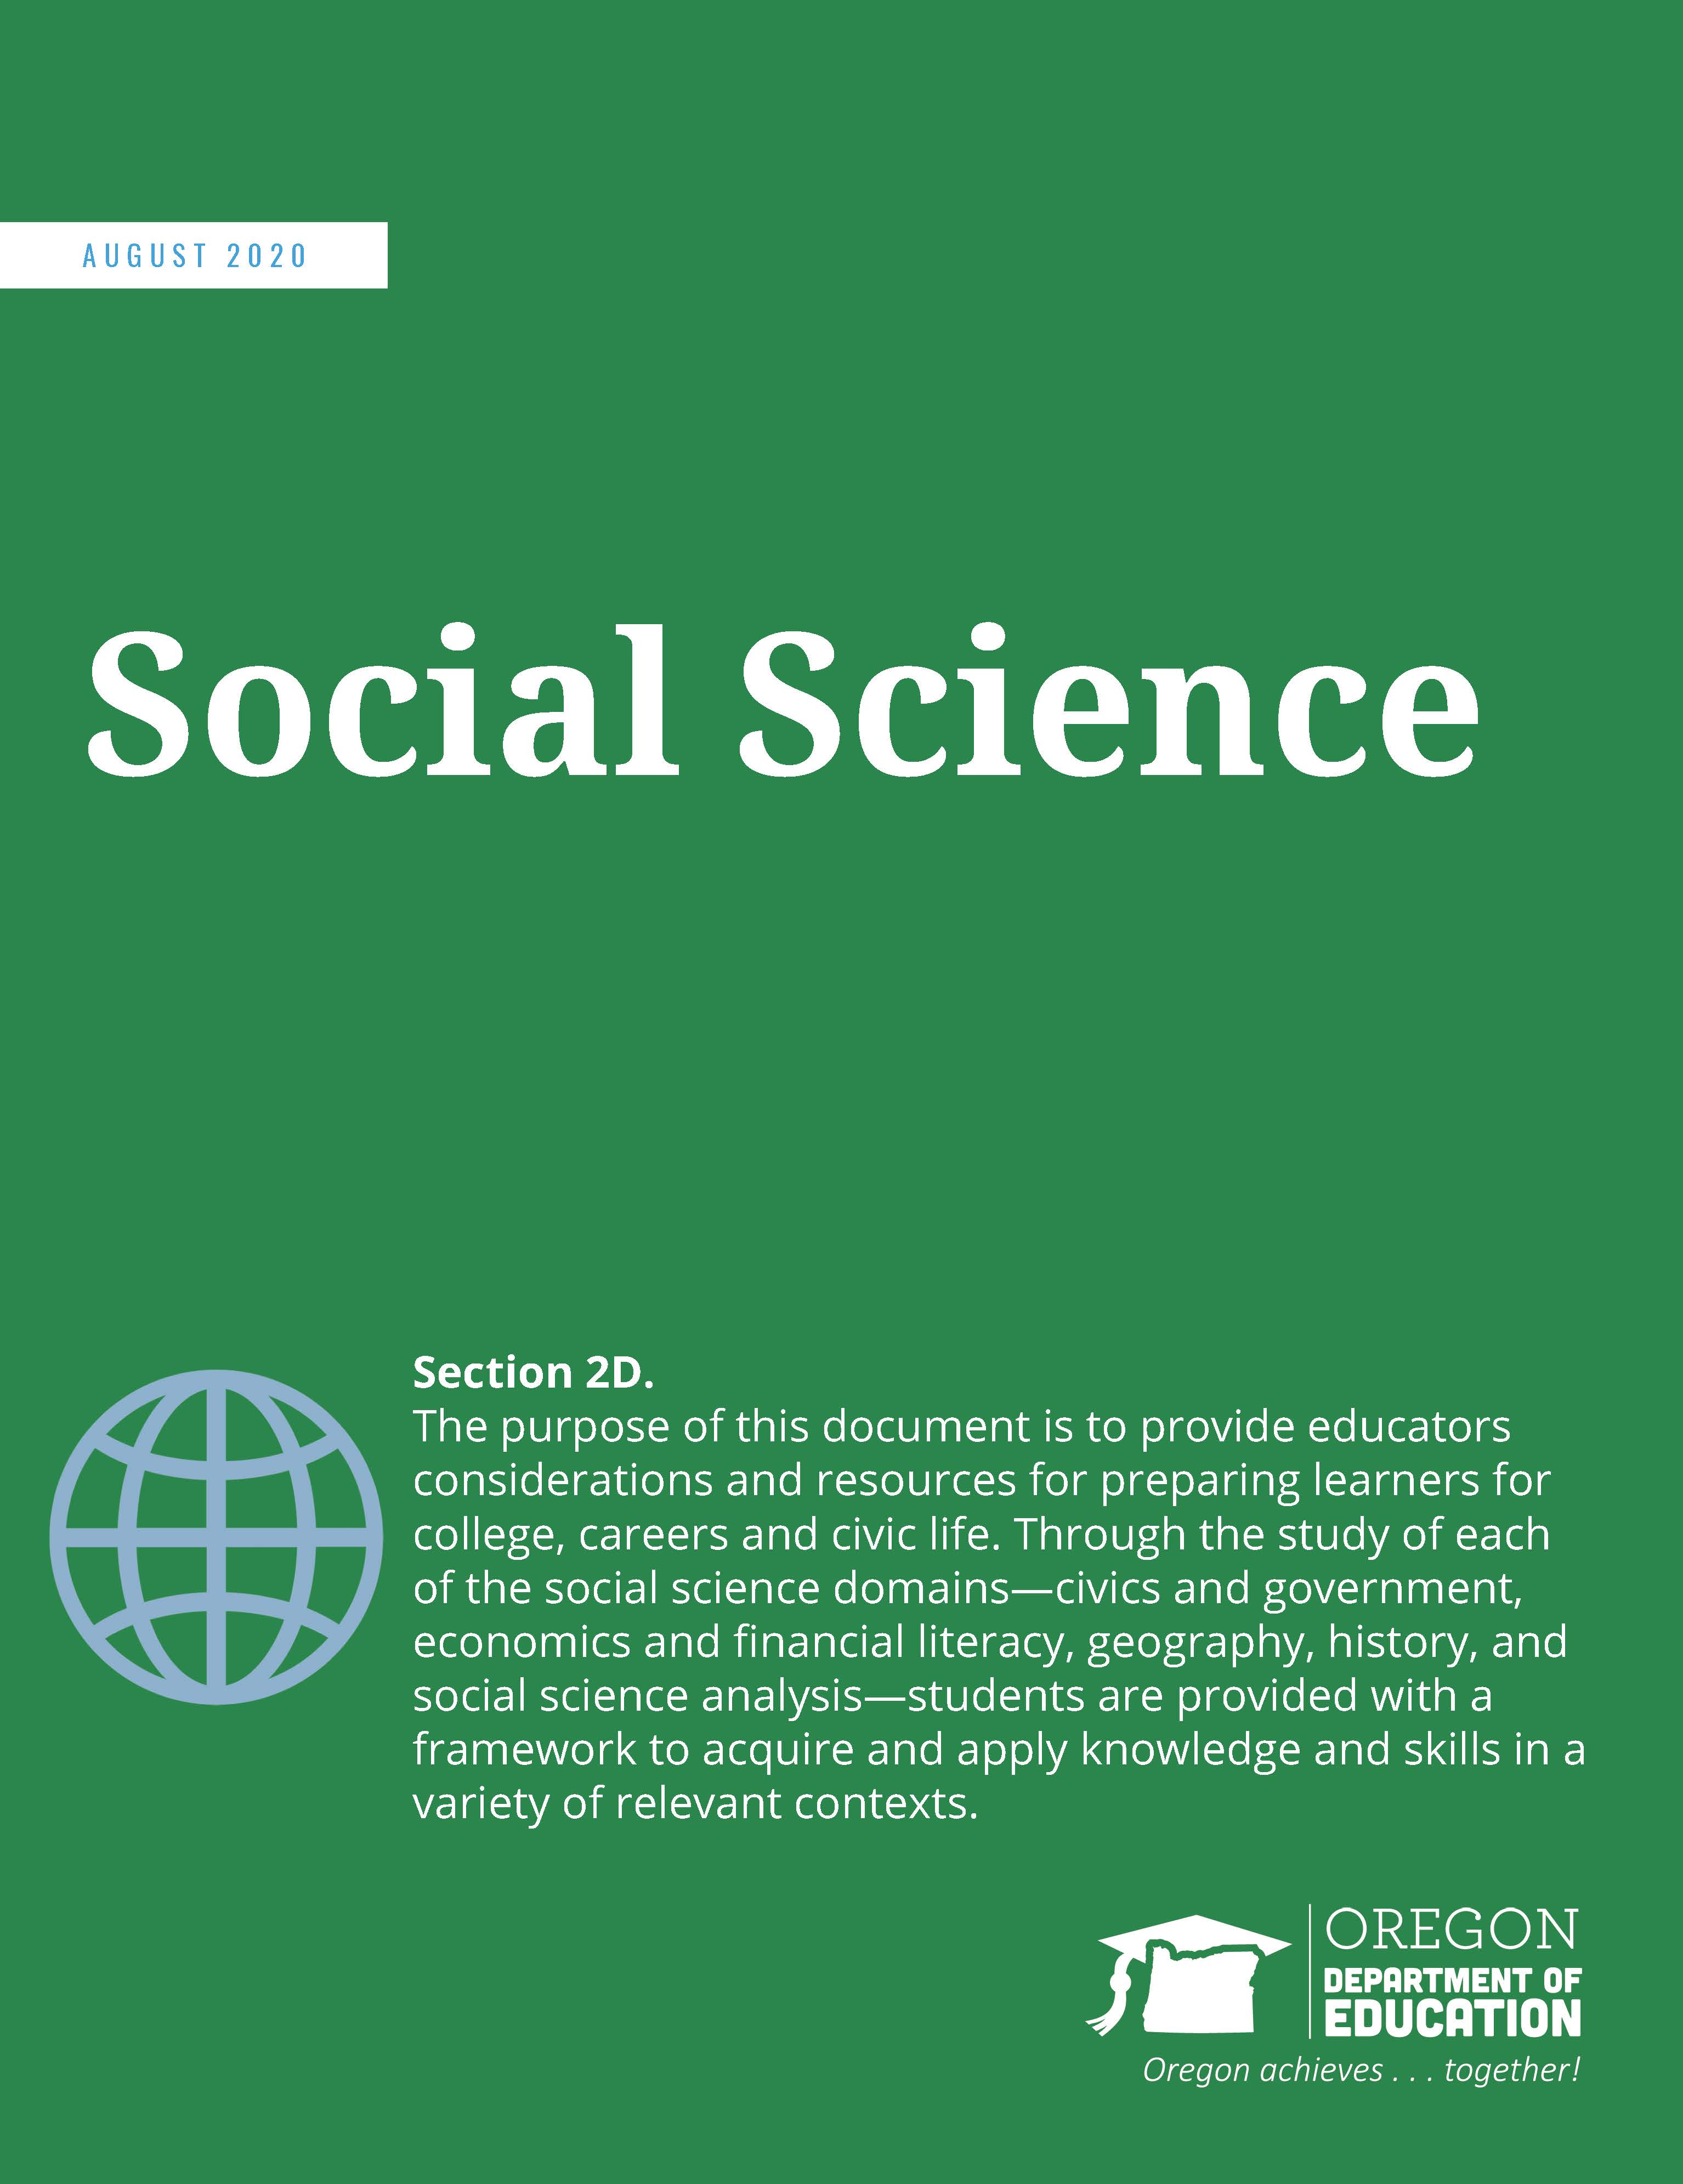 Social Science Cover - Green